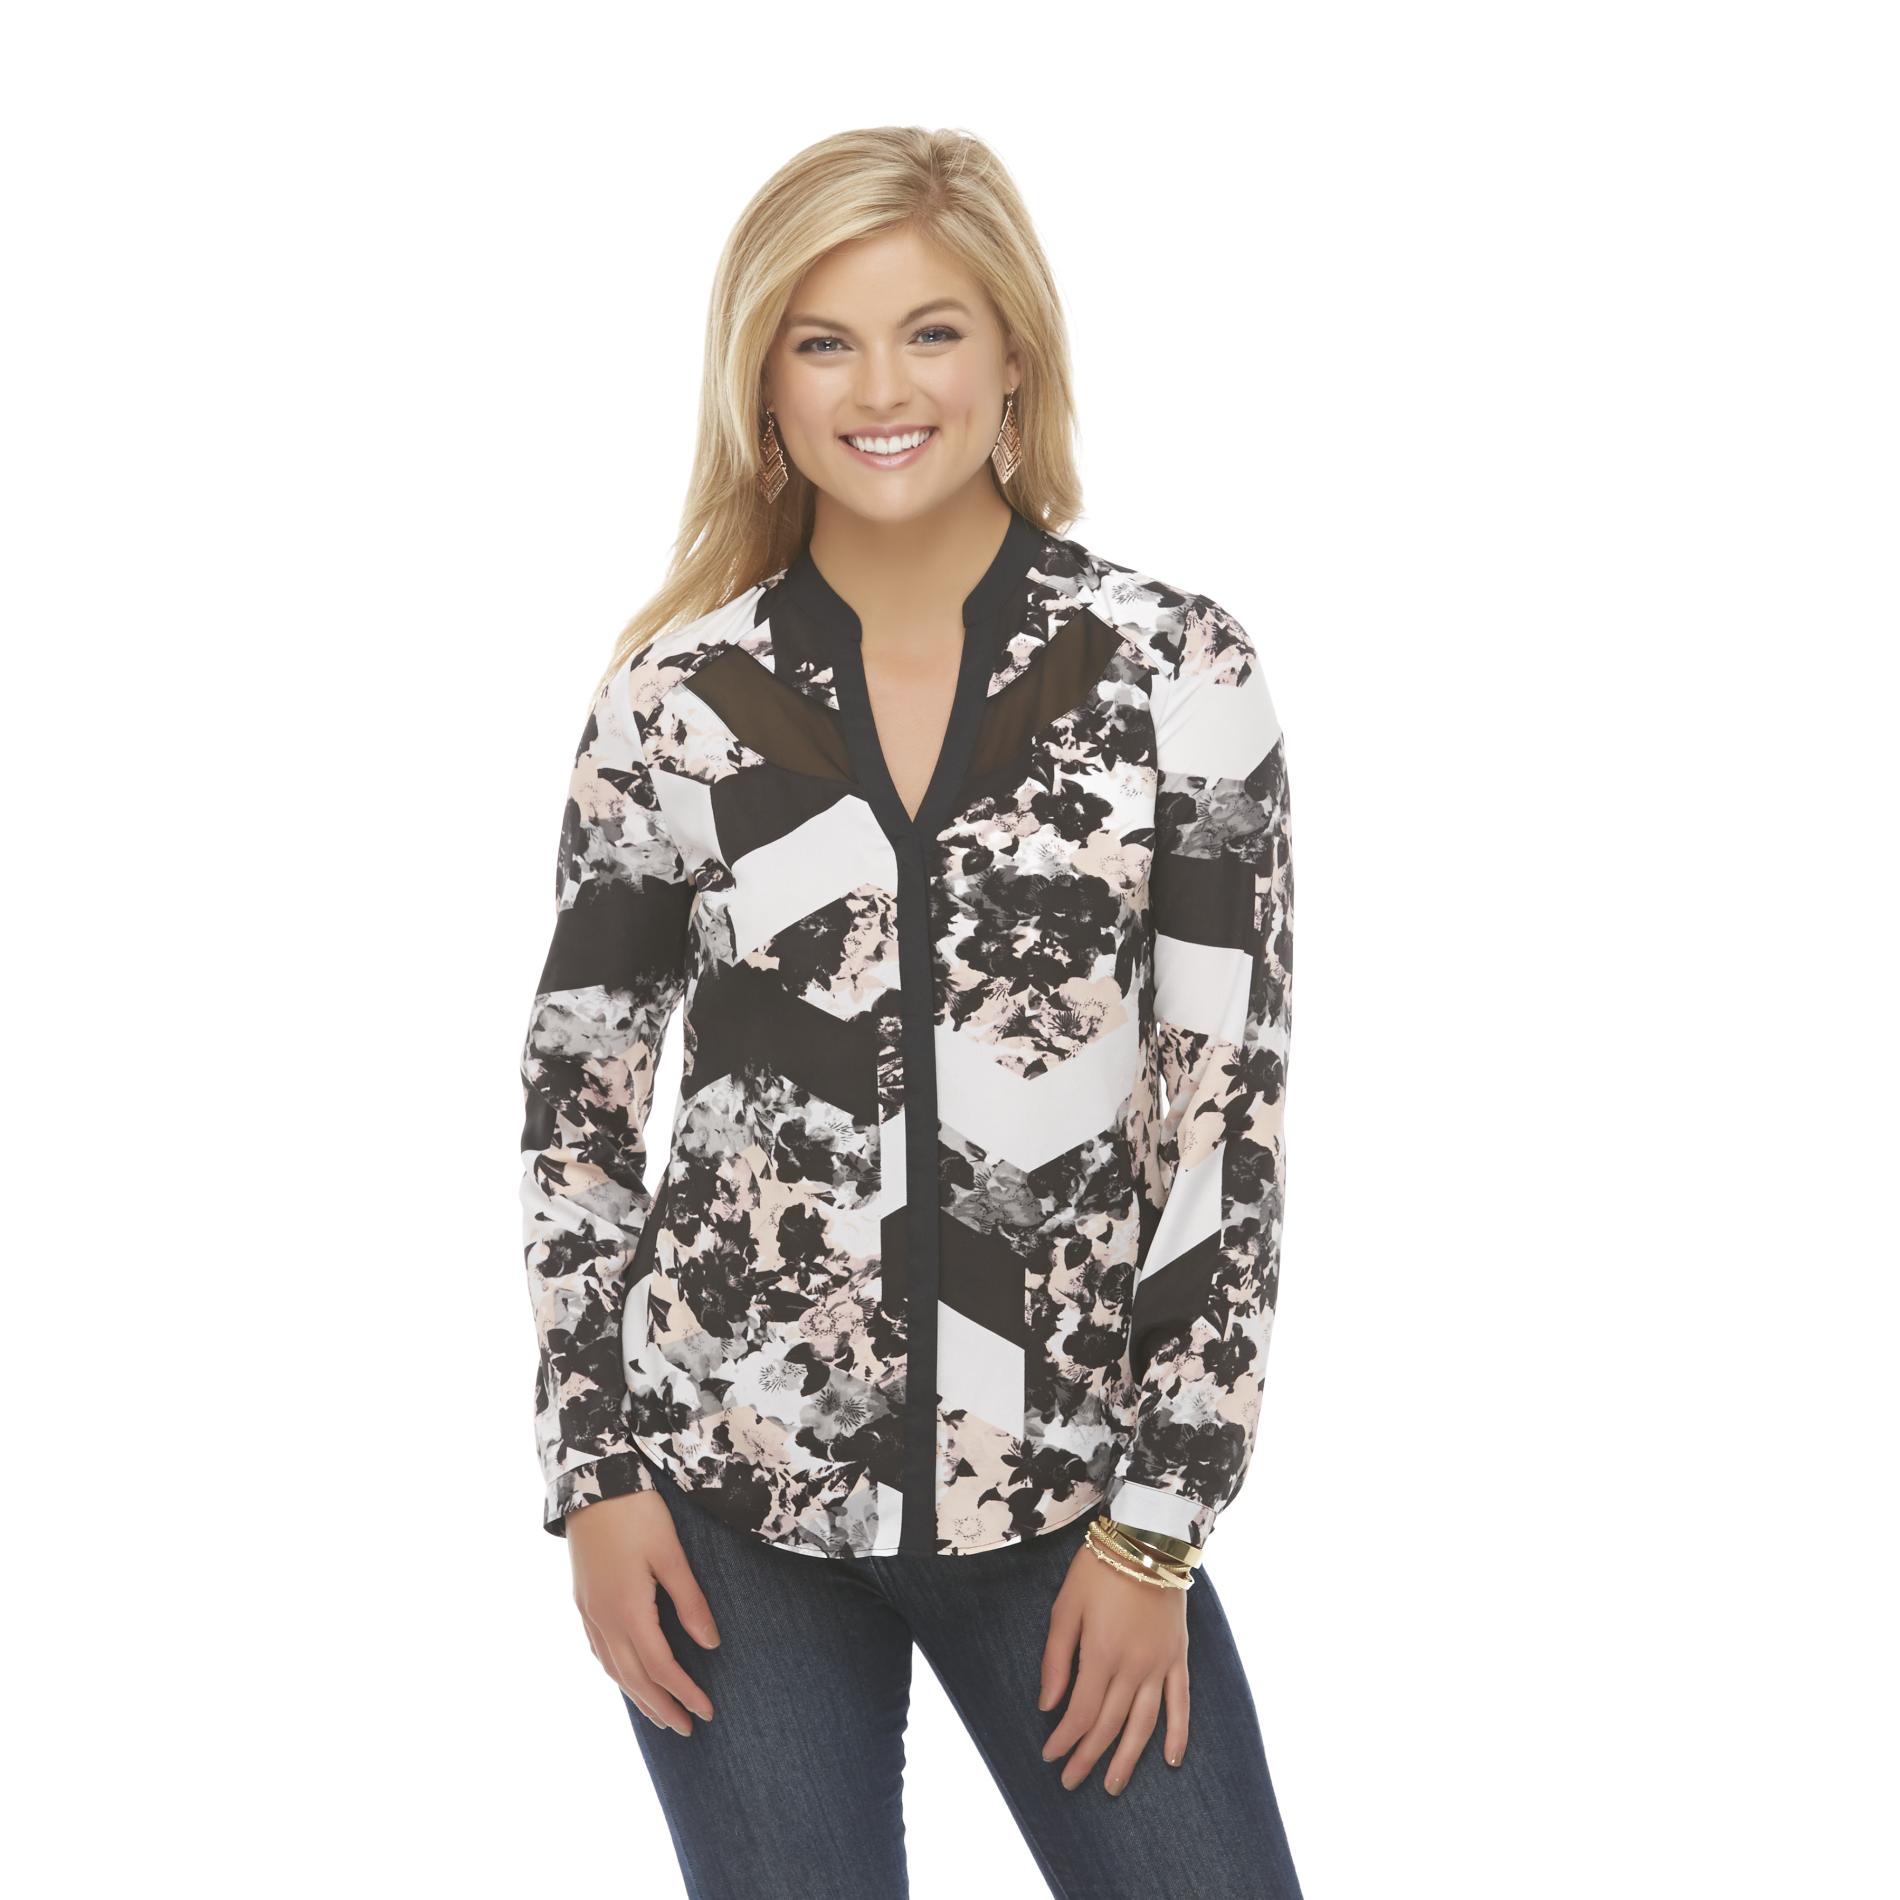 Attention Women's Mesh Inset Shirt - Floral